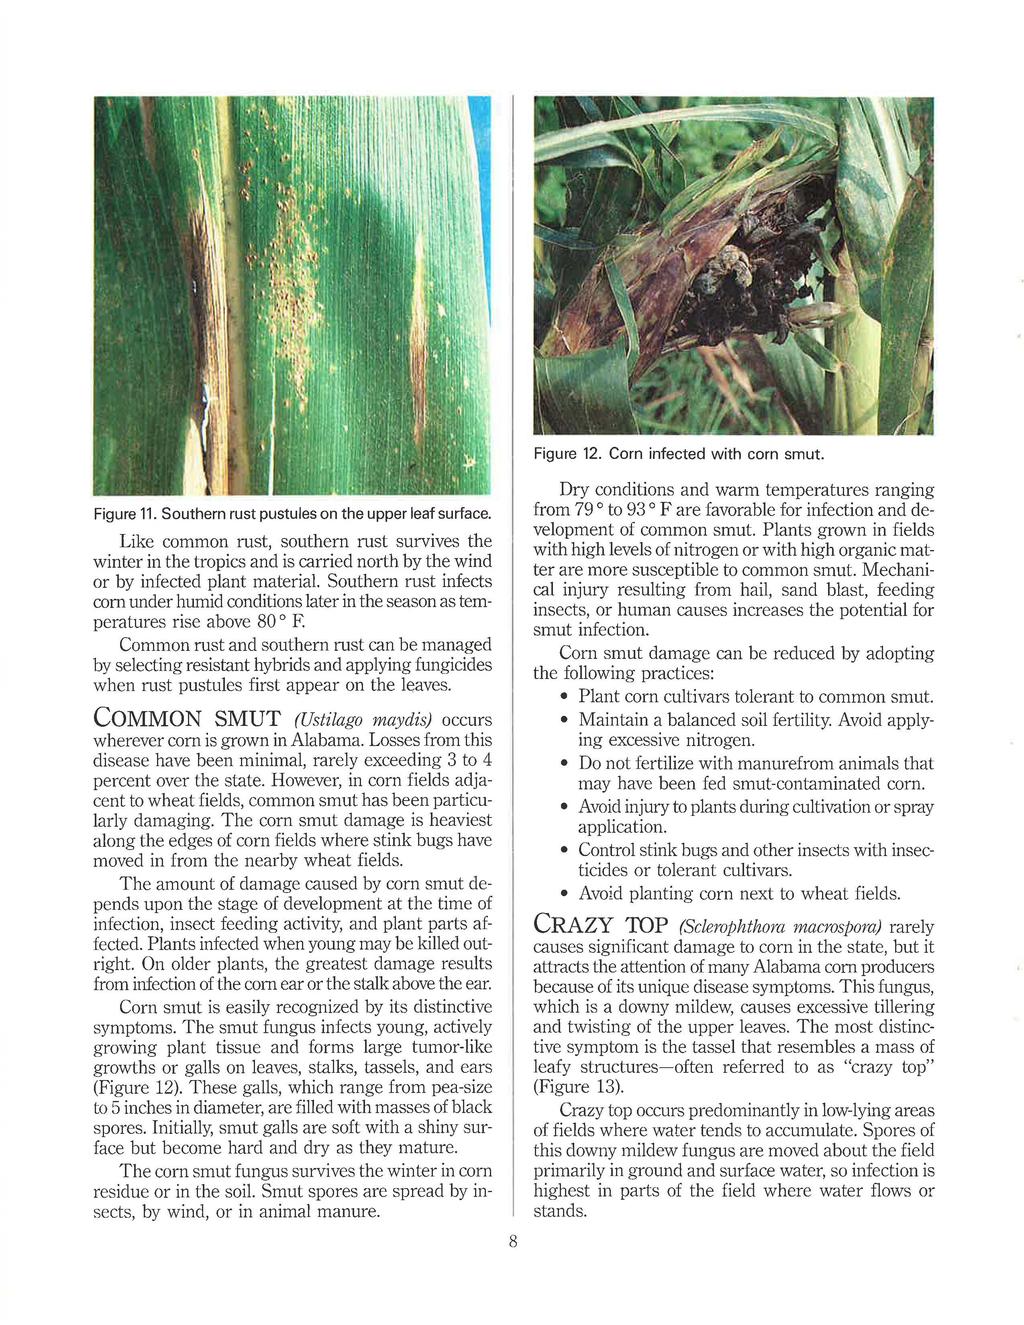 Figure 11. Southern rust pustules on the upper leaf surface. Like common rust, southern rust survives the winter in the tropics and is carried north by the wind or by infected plant material.